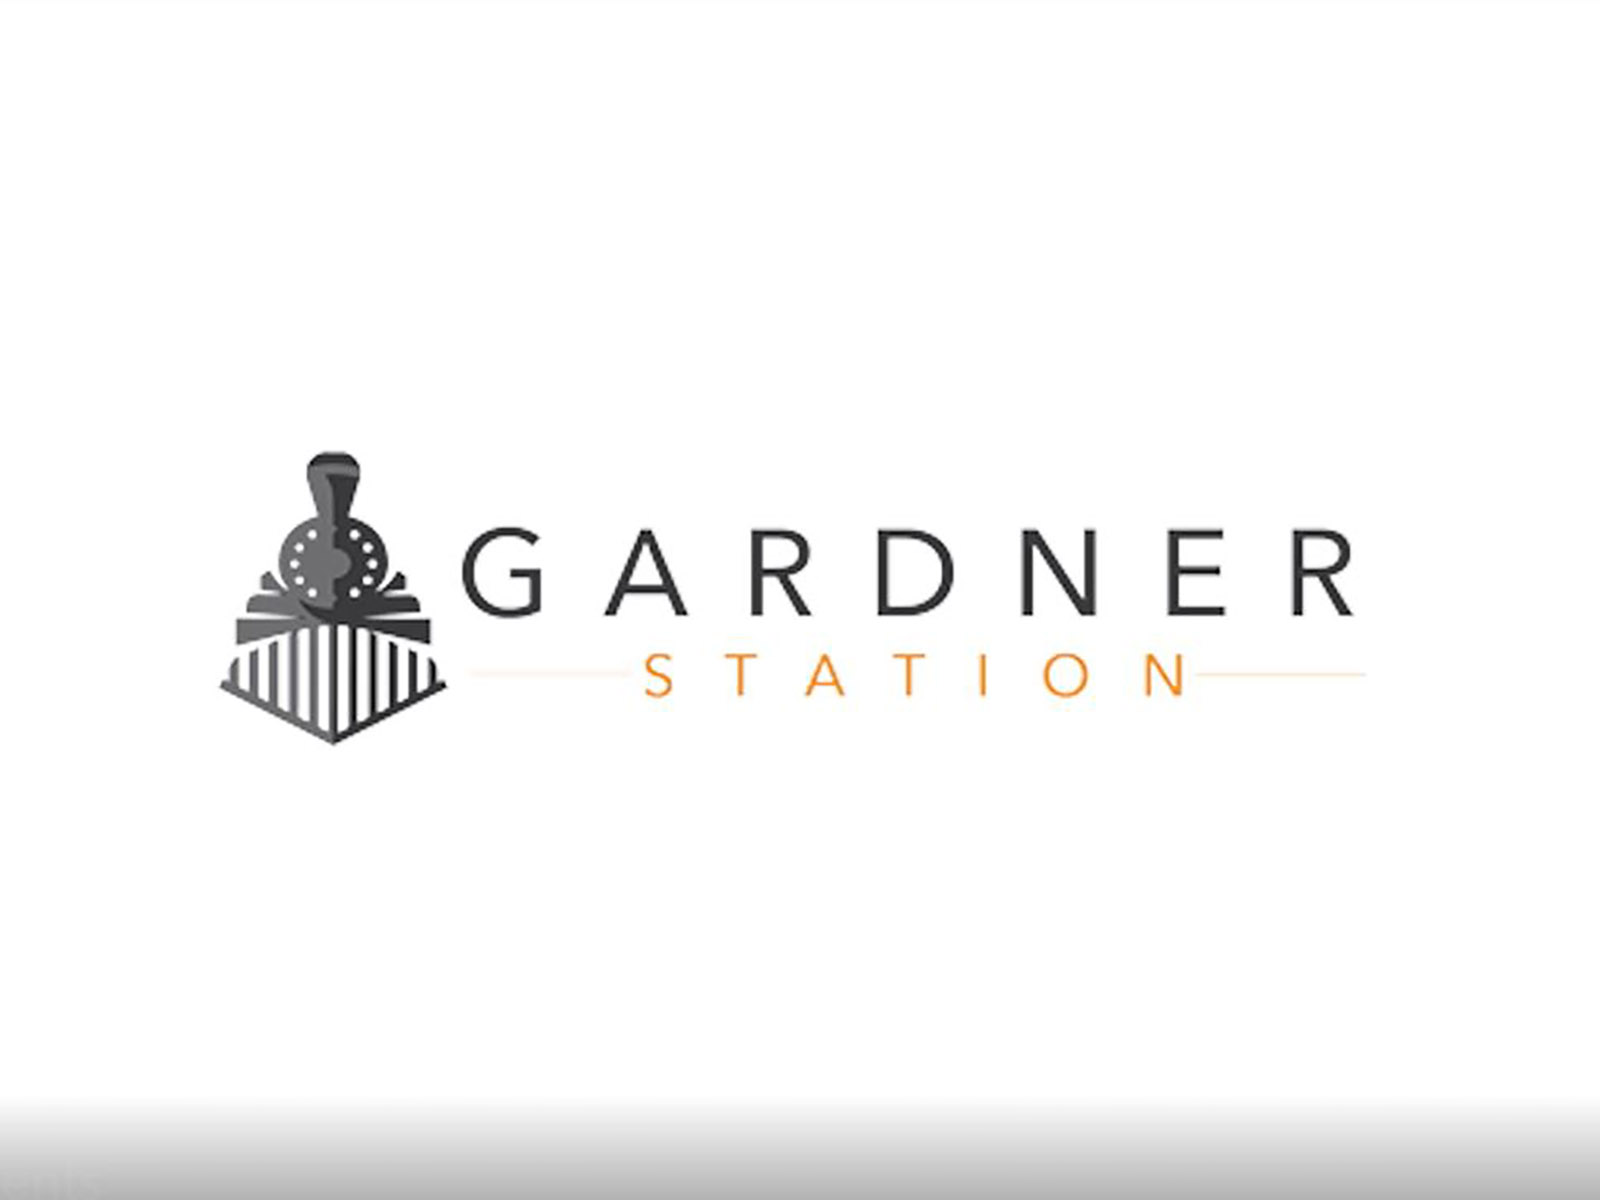 Come home to the West Jordan apartments you have been waiting for at Gardner Station. Take a video tour of our thriving community, and experience better living today.